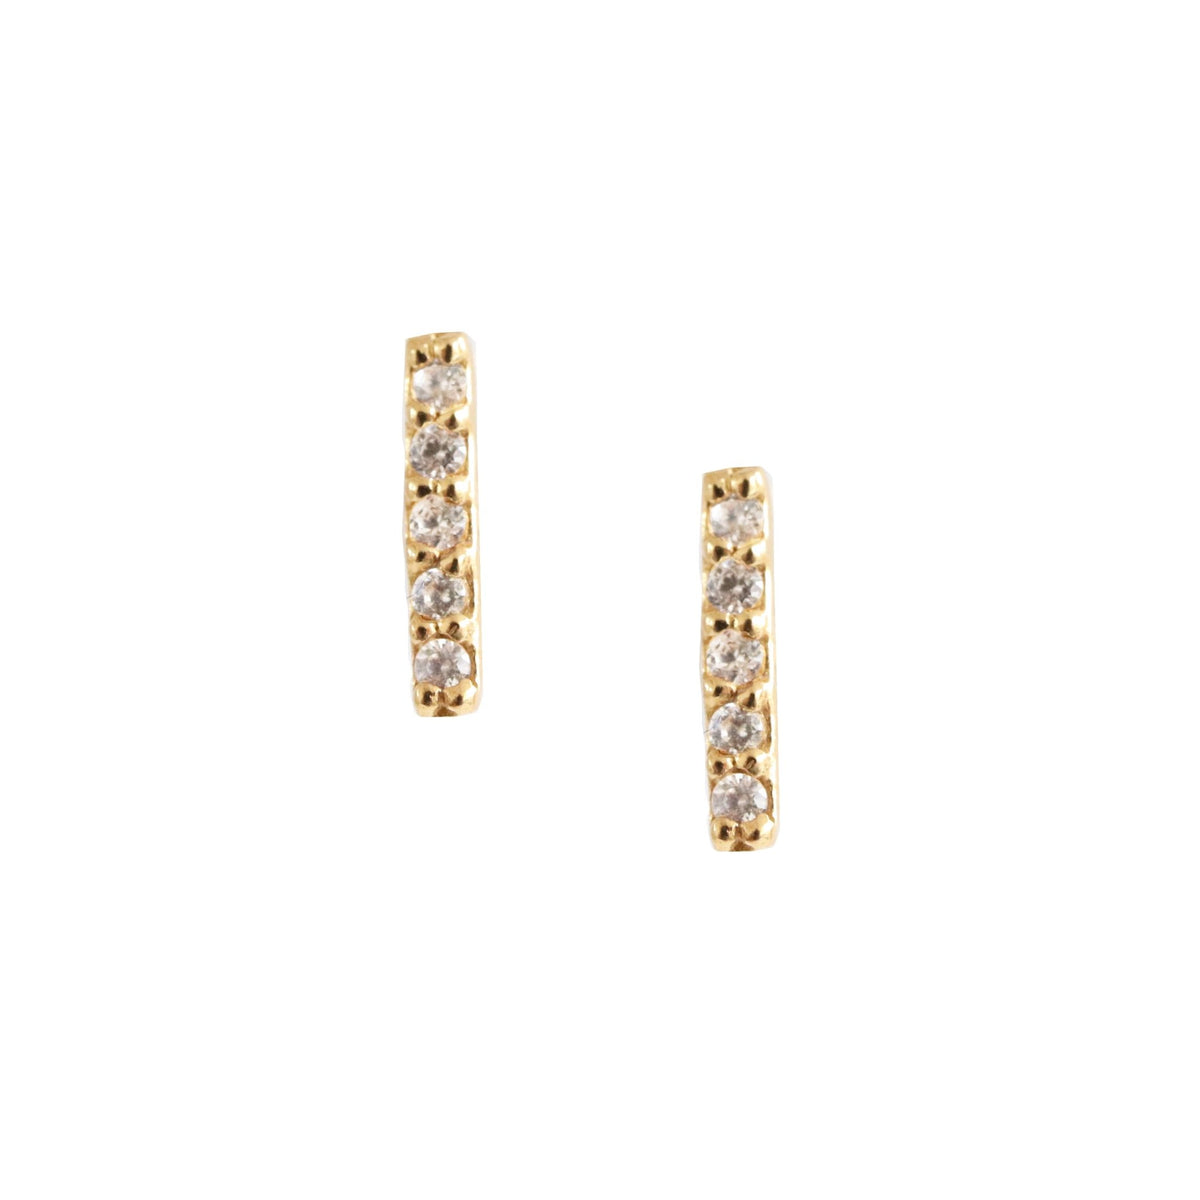 TINY LOVE BAR STUDS - CUBIC ZIRCONIA &amp; GOLD - SO PRETTY CARA COTTER